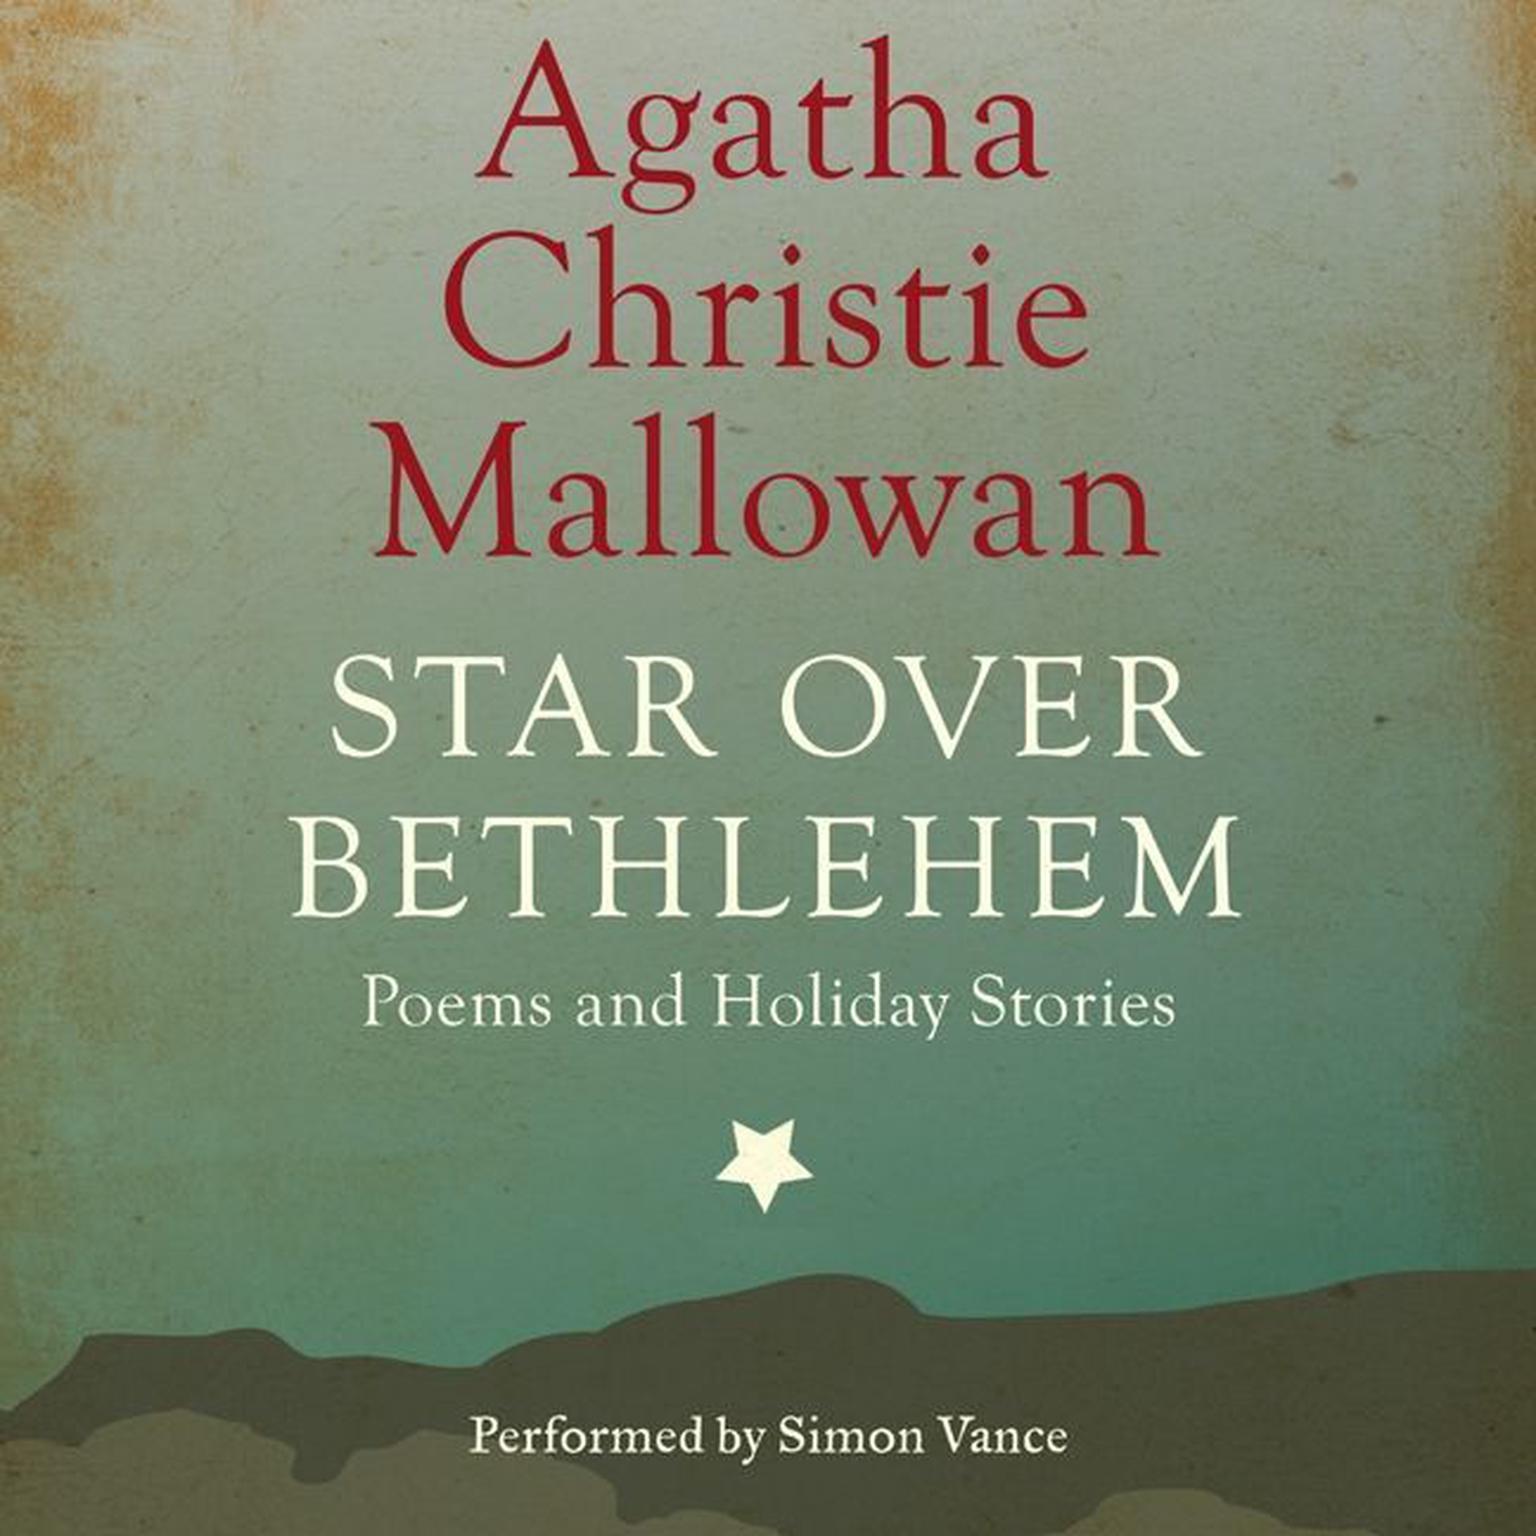 Star Over Bethlehem and Other Stories: Poems and Holiday Stories Audiobook, by Agatha Christie